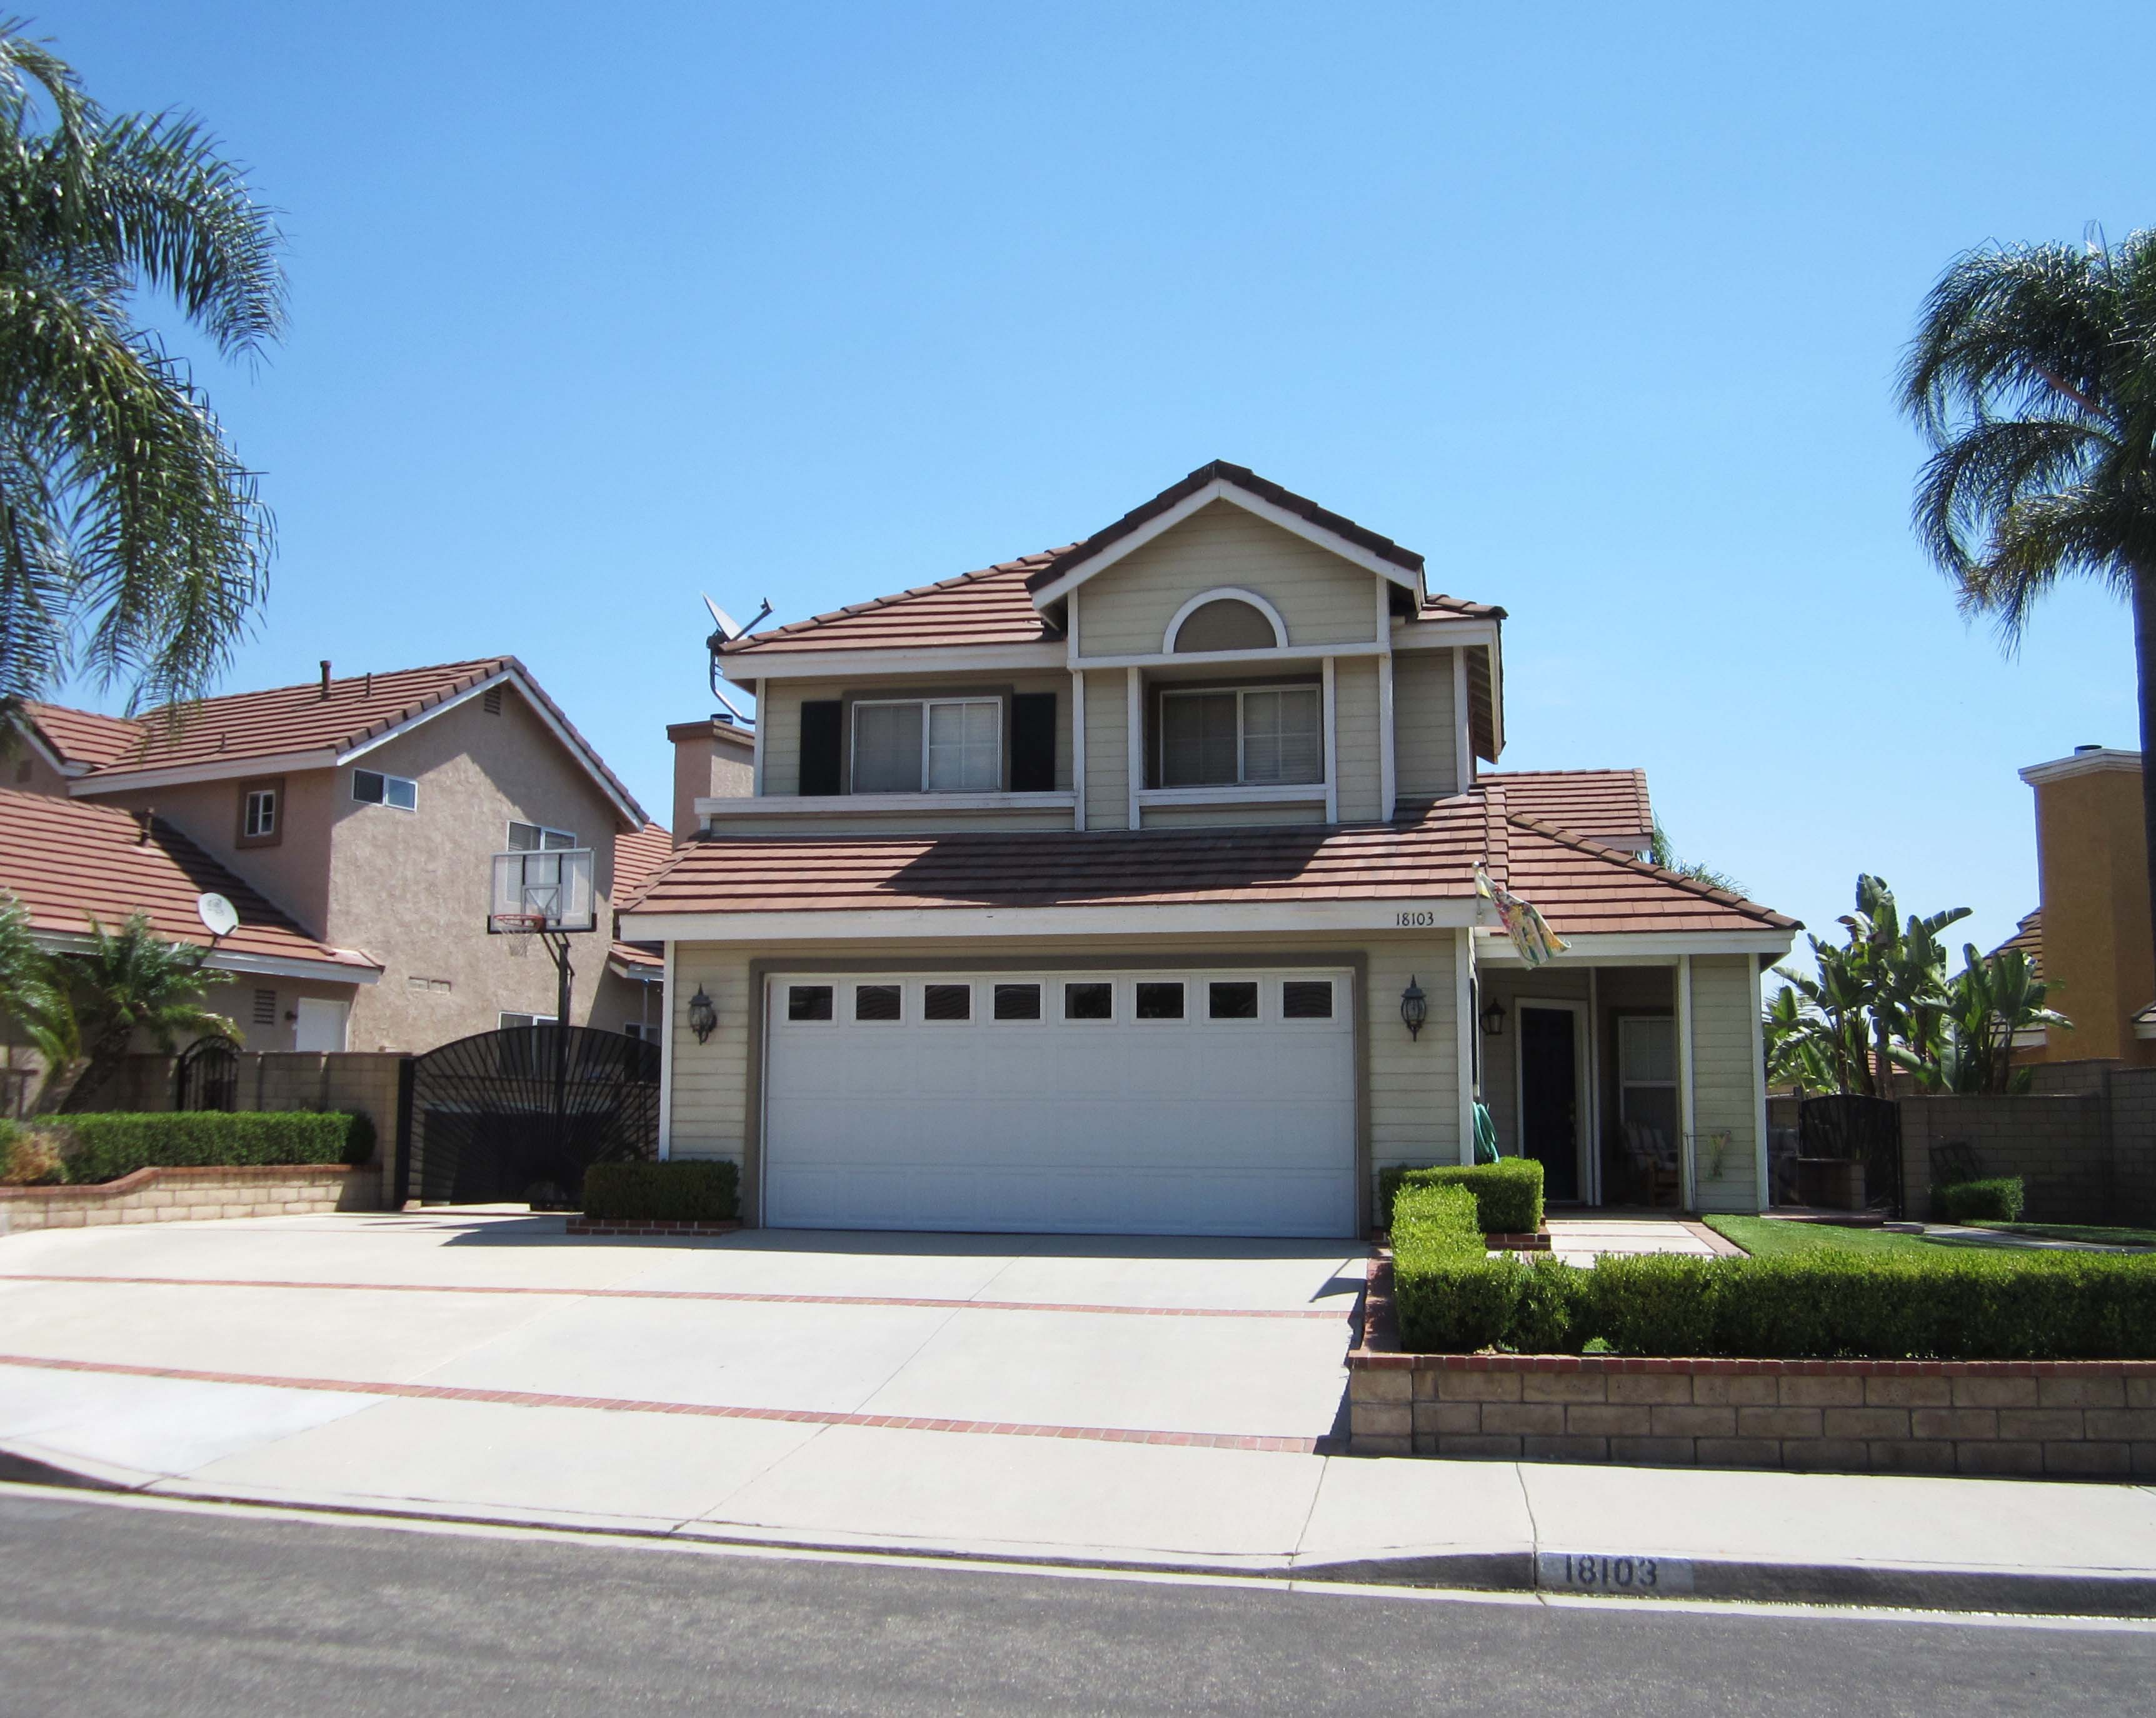 Anne Hwang-Burnell Sold Our Home in Chino Hills and We Purchased on with her at The Preserve in Chino